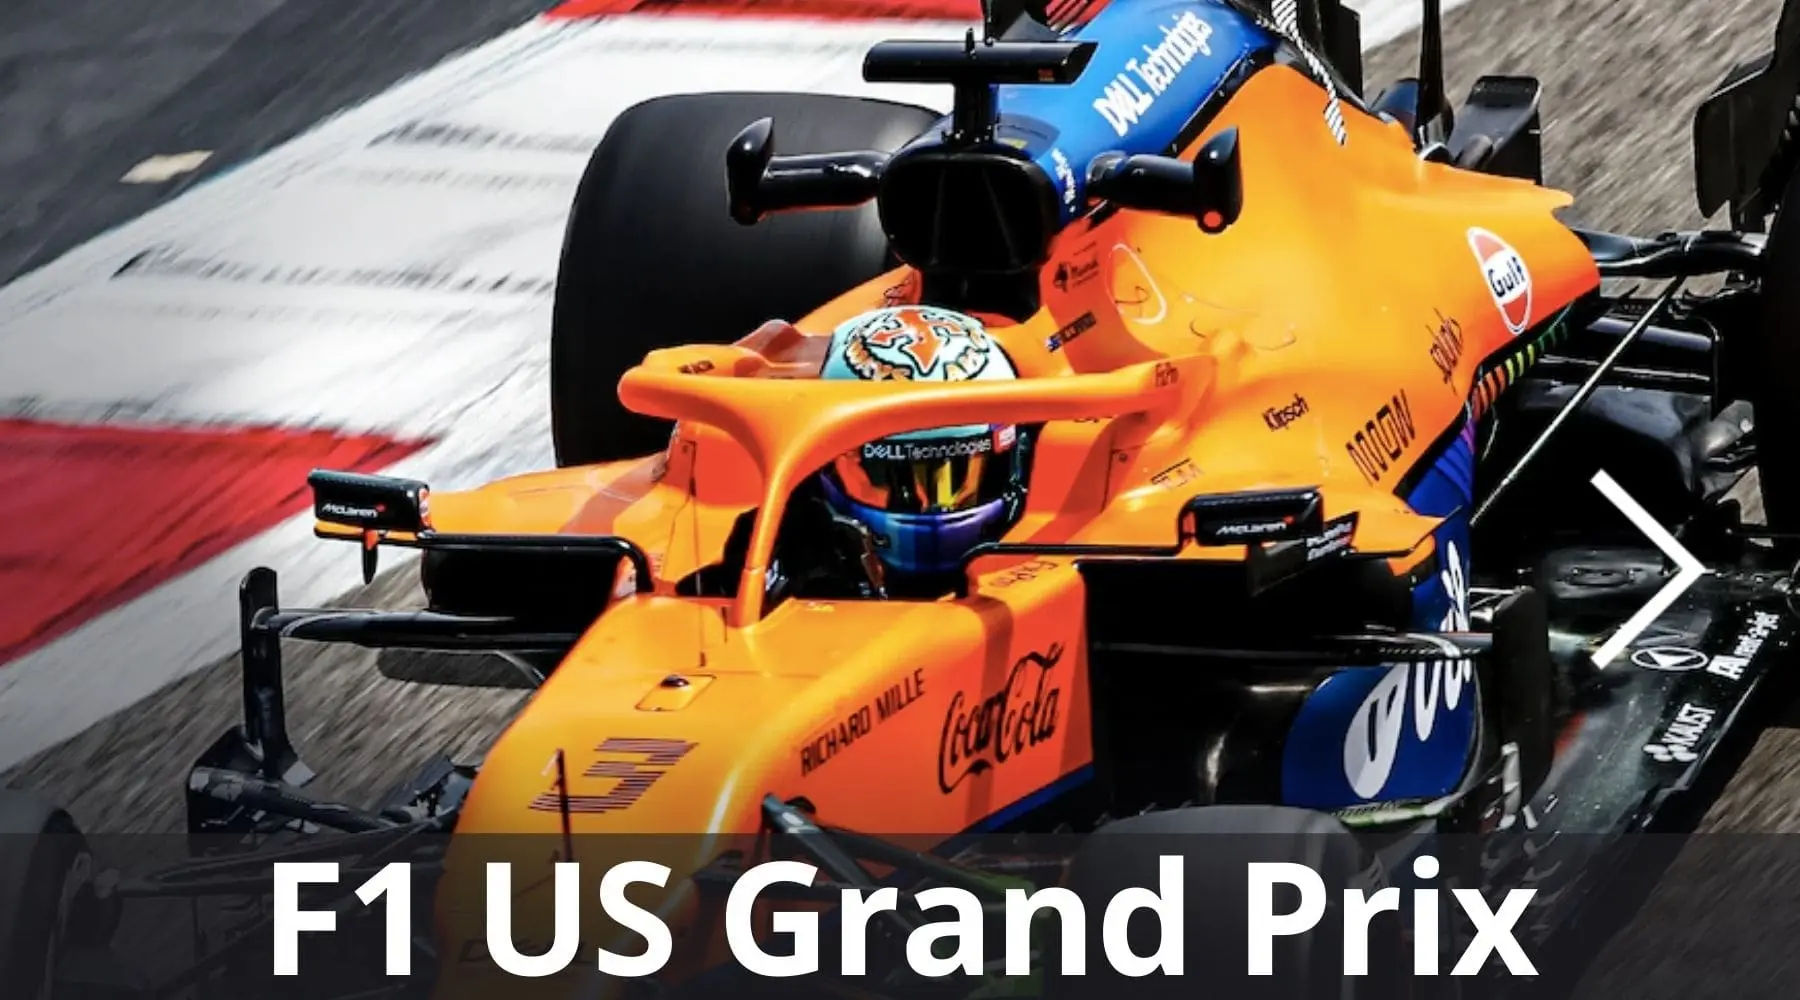 How to watch F1 US Grand Prix live and free in Australia